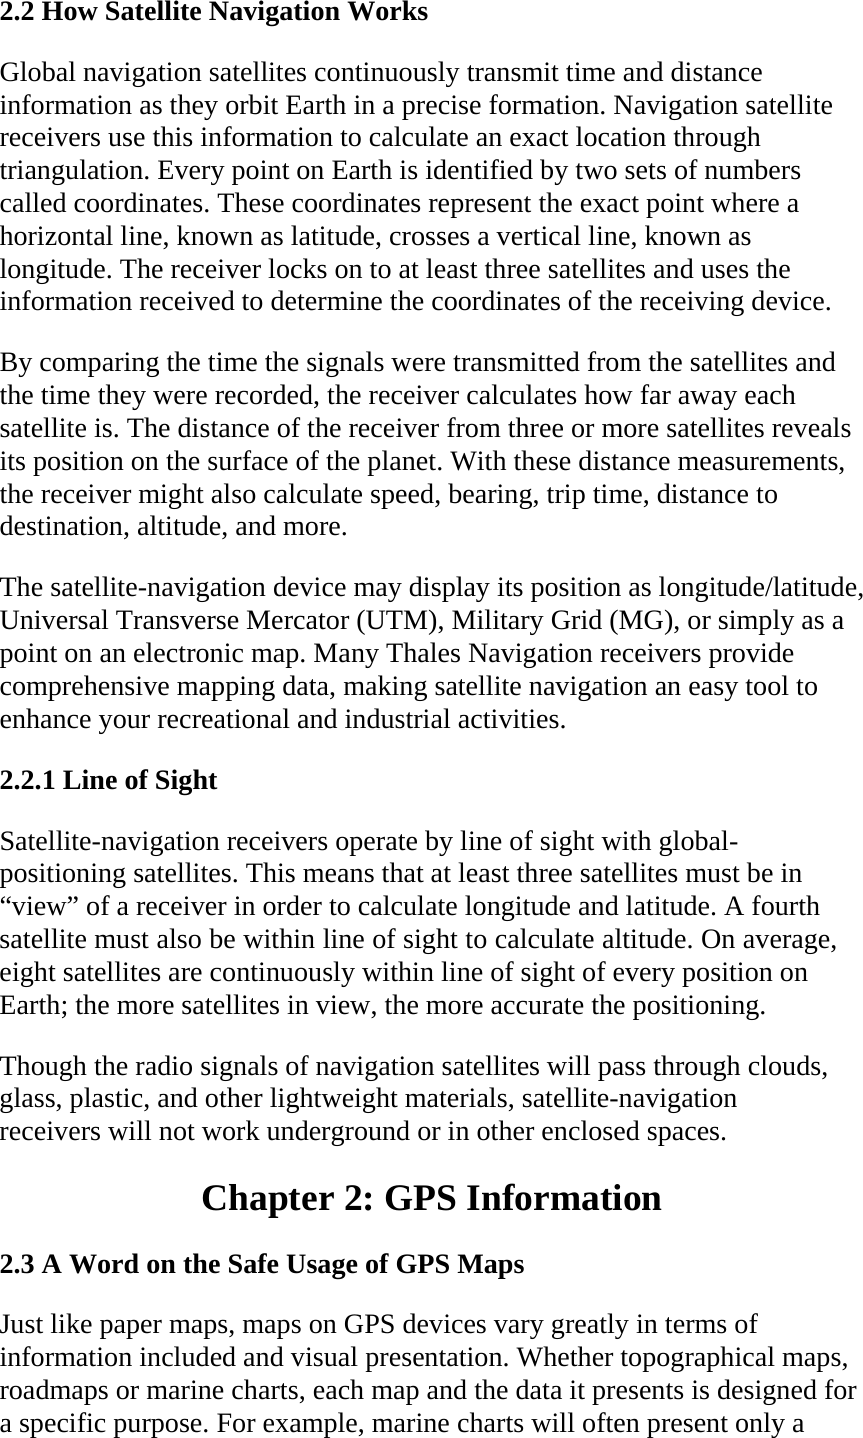 2.2 How Satellite Navigation Works  Global navigation satellites continuously transmit time and distance information as they orbit Earth in a precise formation. Navigation satellite receivers use this information to calculate an exact location through triangulation. Every point on Earth is identified by two sets of numbers called coordinates. These coordinates represent the exact point where a horizontal line, known as latitude, crosses a vertical line, known as longitude. The receiver locks on to at least three satellites and uses the information received to determine the coordinates of the receiving device.  By comparing the time the signals were transmitted from the satellites and the time they were recorded, the receiver calculates how far away each satellite is. The distance of the receiver from three or more satellites reveals its position on the surface of the planet. With these distance measurements, the receiver might also calculate speed, bearing, trip time, distance to destination, altitude, and more.  The satellite-navigation device may display its position as longitude/latitude, Universal Transverse Mercator (UTM), Military Grid (MG), or simply as a point on an electronic map. Many Thales Navigation receivers provide comprehensive mapping data, making satellite navigation an easy tool to enhance your recreational and industrial activities.  2.2.1 Line of Sight  Satellite-navigation receivers operate by line of sight with global-positioning satellites. This means that at least three satellites must be in “view” of a receiver in order to calculate longitude and latitude. A fourth satellite must also be within line of sight to calculate altitude. On average, eight satellites are continuously within line of sight of every position on Earth; the more satellites in view, the more accurate the positioning.  Though the radio signals of navigation satellites will pass through clouds, glass, plastic, and other lightweight materials, satellite-navigation receivers will not work underground or in other enclosed spaces.  Chapter 2: GPS Information  2.3 A Word on the Safe Usage of GPS Maps  Just like paper maps, maps on GPS devices vary greatly in terms of information included and visual presentation. Whether topographical maps, roadmaps or marine charts, each map and the data it presents is designed for a specific purpose. For example, marine charts will often present only a 